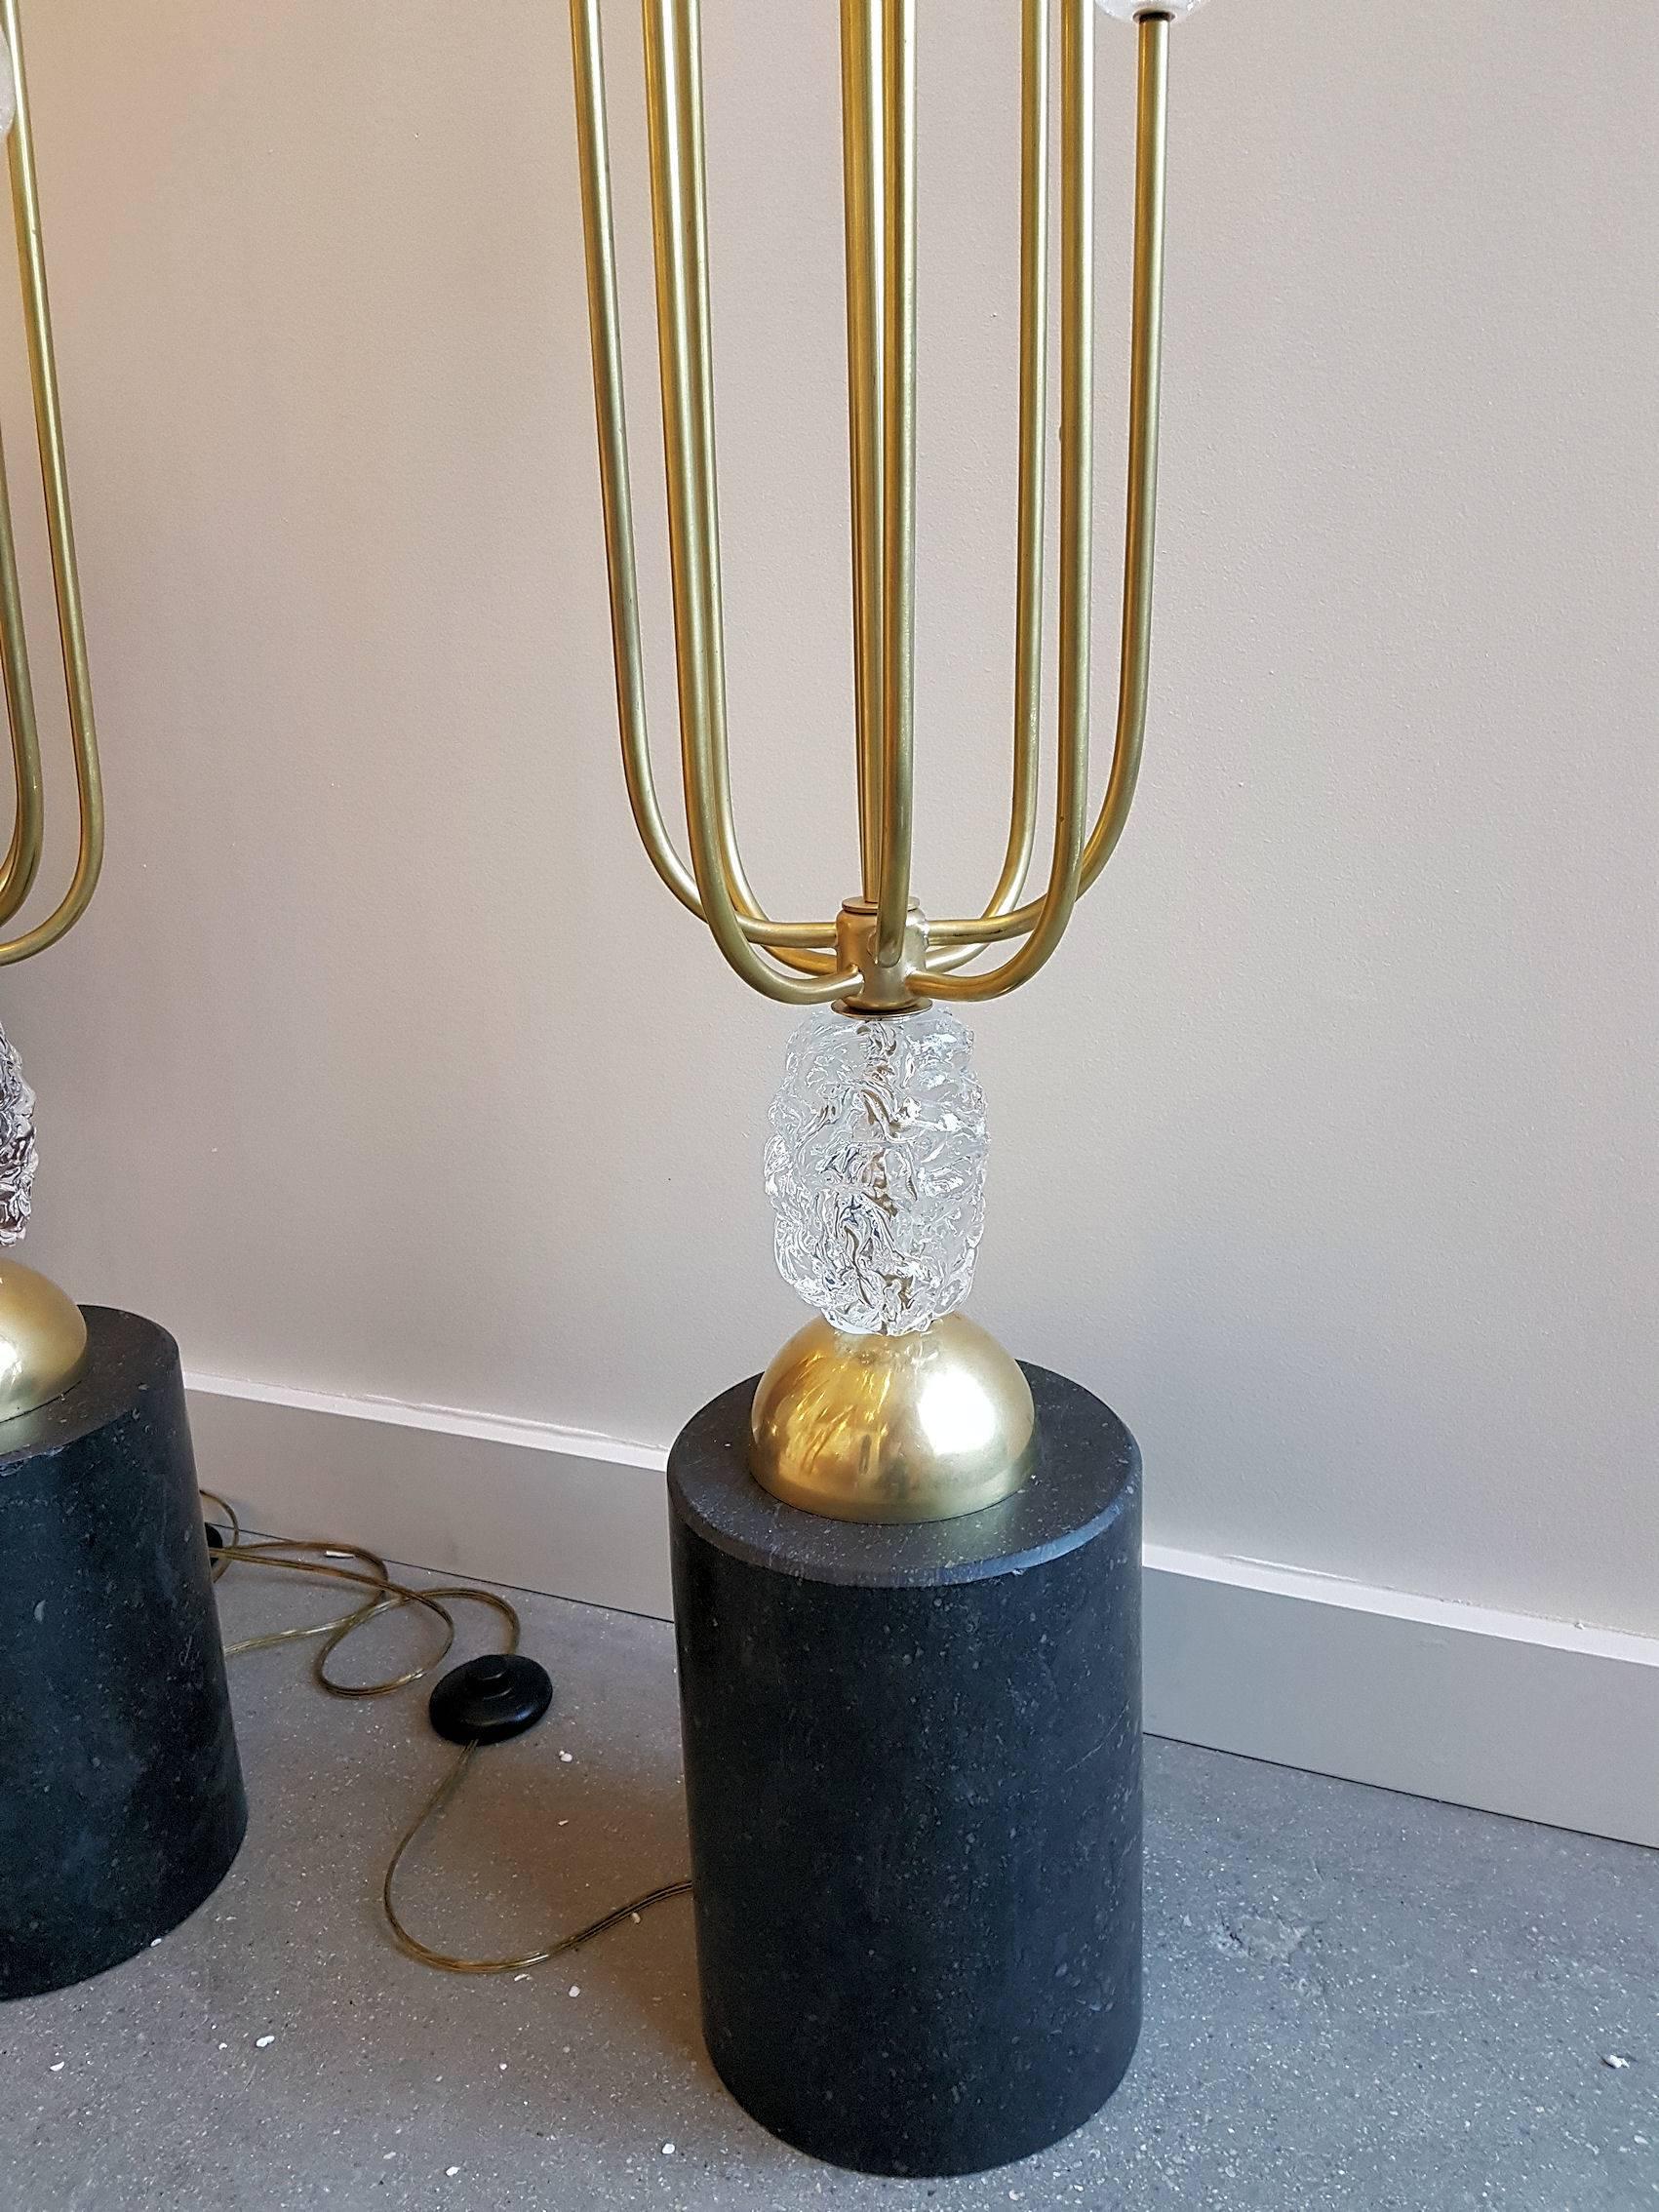 Pair of Mid-Century Modern standing floor lamps.
The cylindrical base is in black veined stone.
Eight branches of brass hold a Murano Pulegoso plain glass egg: Pulegoso is a Murano glass technique: a type of glass characterized by countless